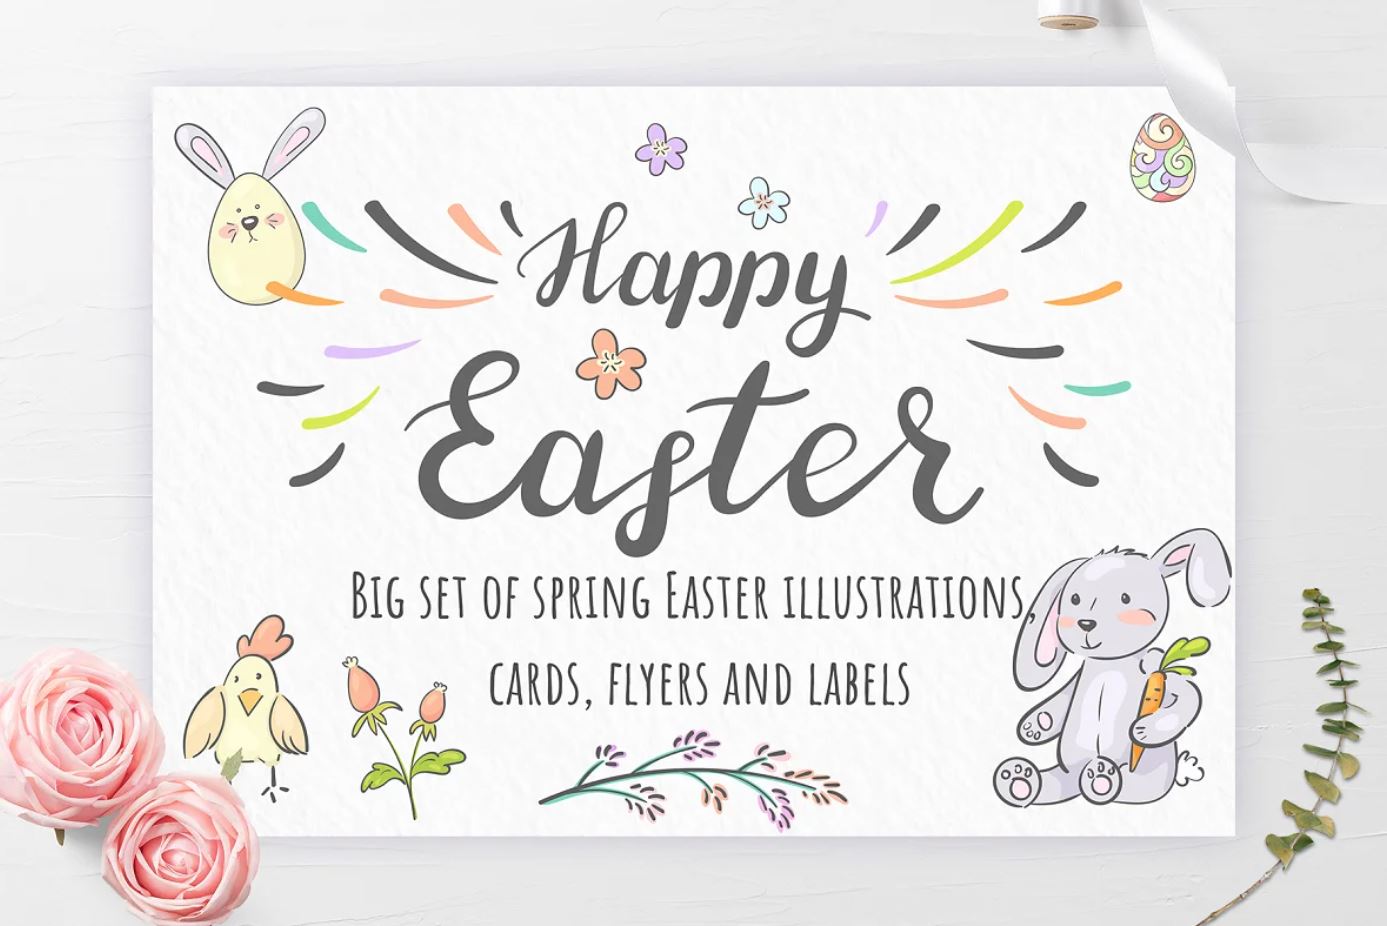 Cute-Easter-cards